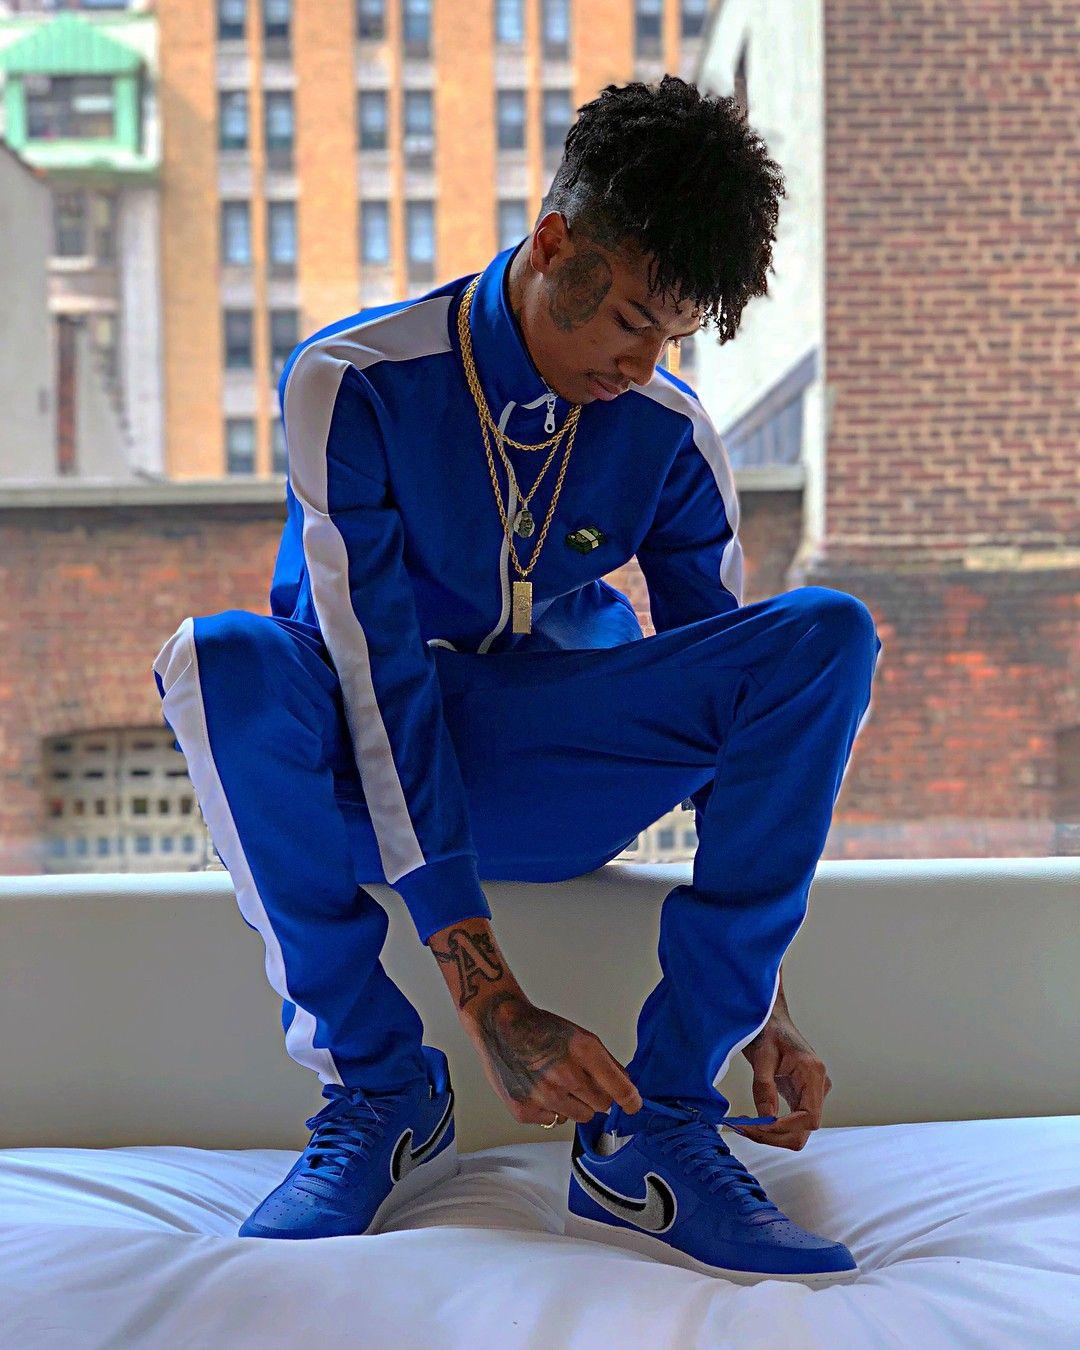 Download wallpapers Blueface 2020 4k white neon lights american rapper  concert music stars creative Migos Blueface with microphone Johnathan  Porter american celebrity Blueface 4K for desktop free Pictures for  desktop free